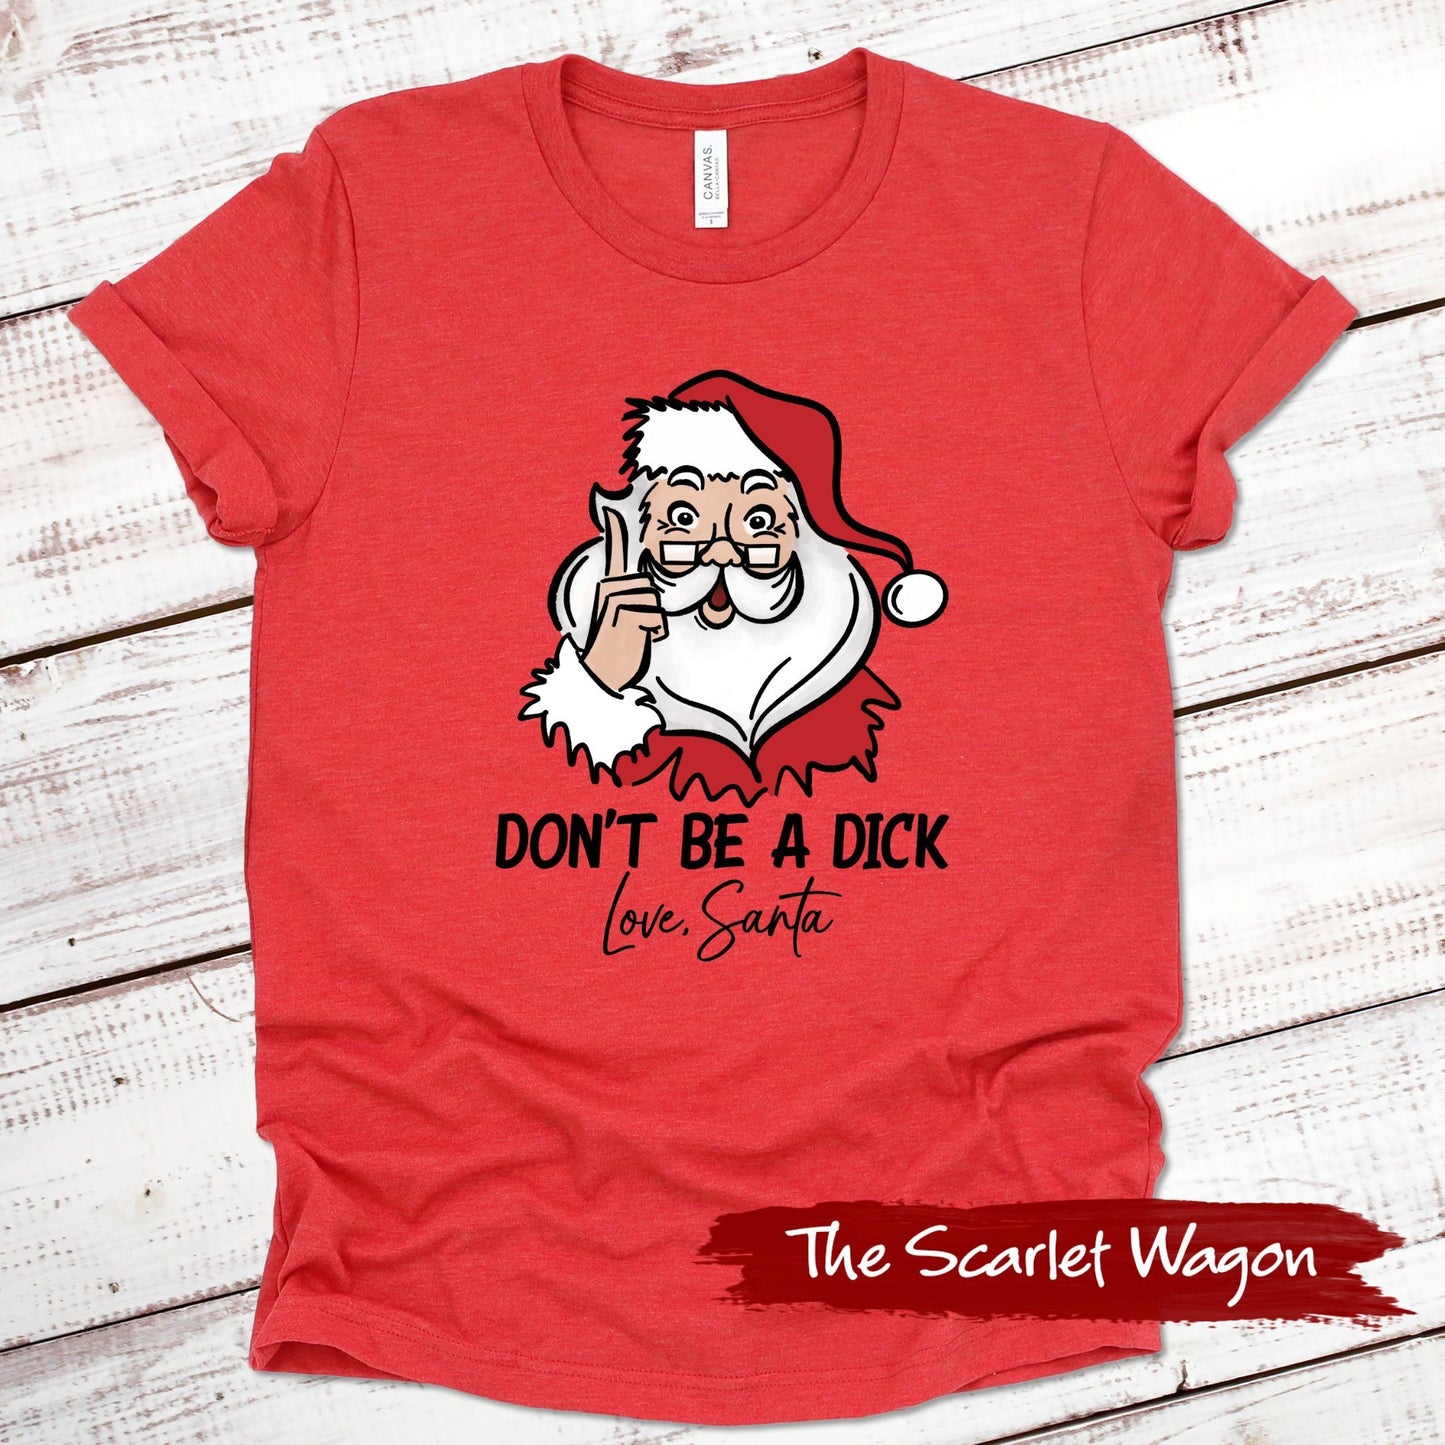 Don't Be a Dick - Love, Santa Christmas Shirt Scarlet Wagon Heather Red XS 